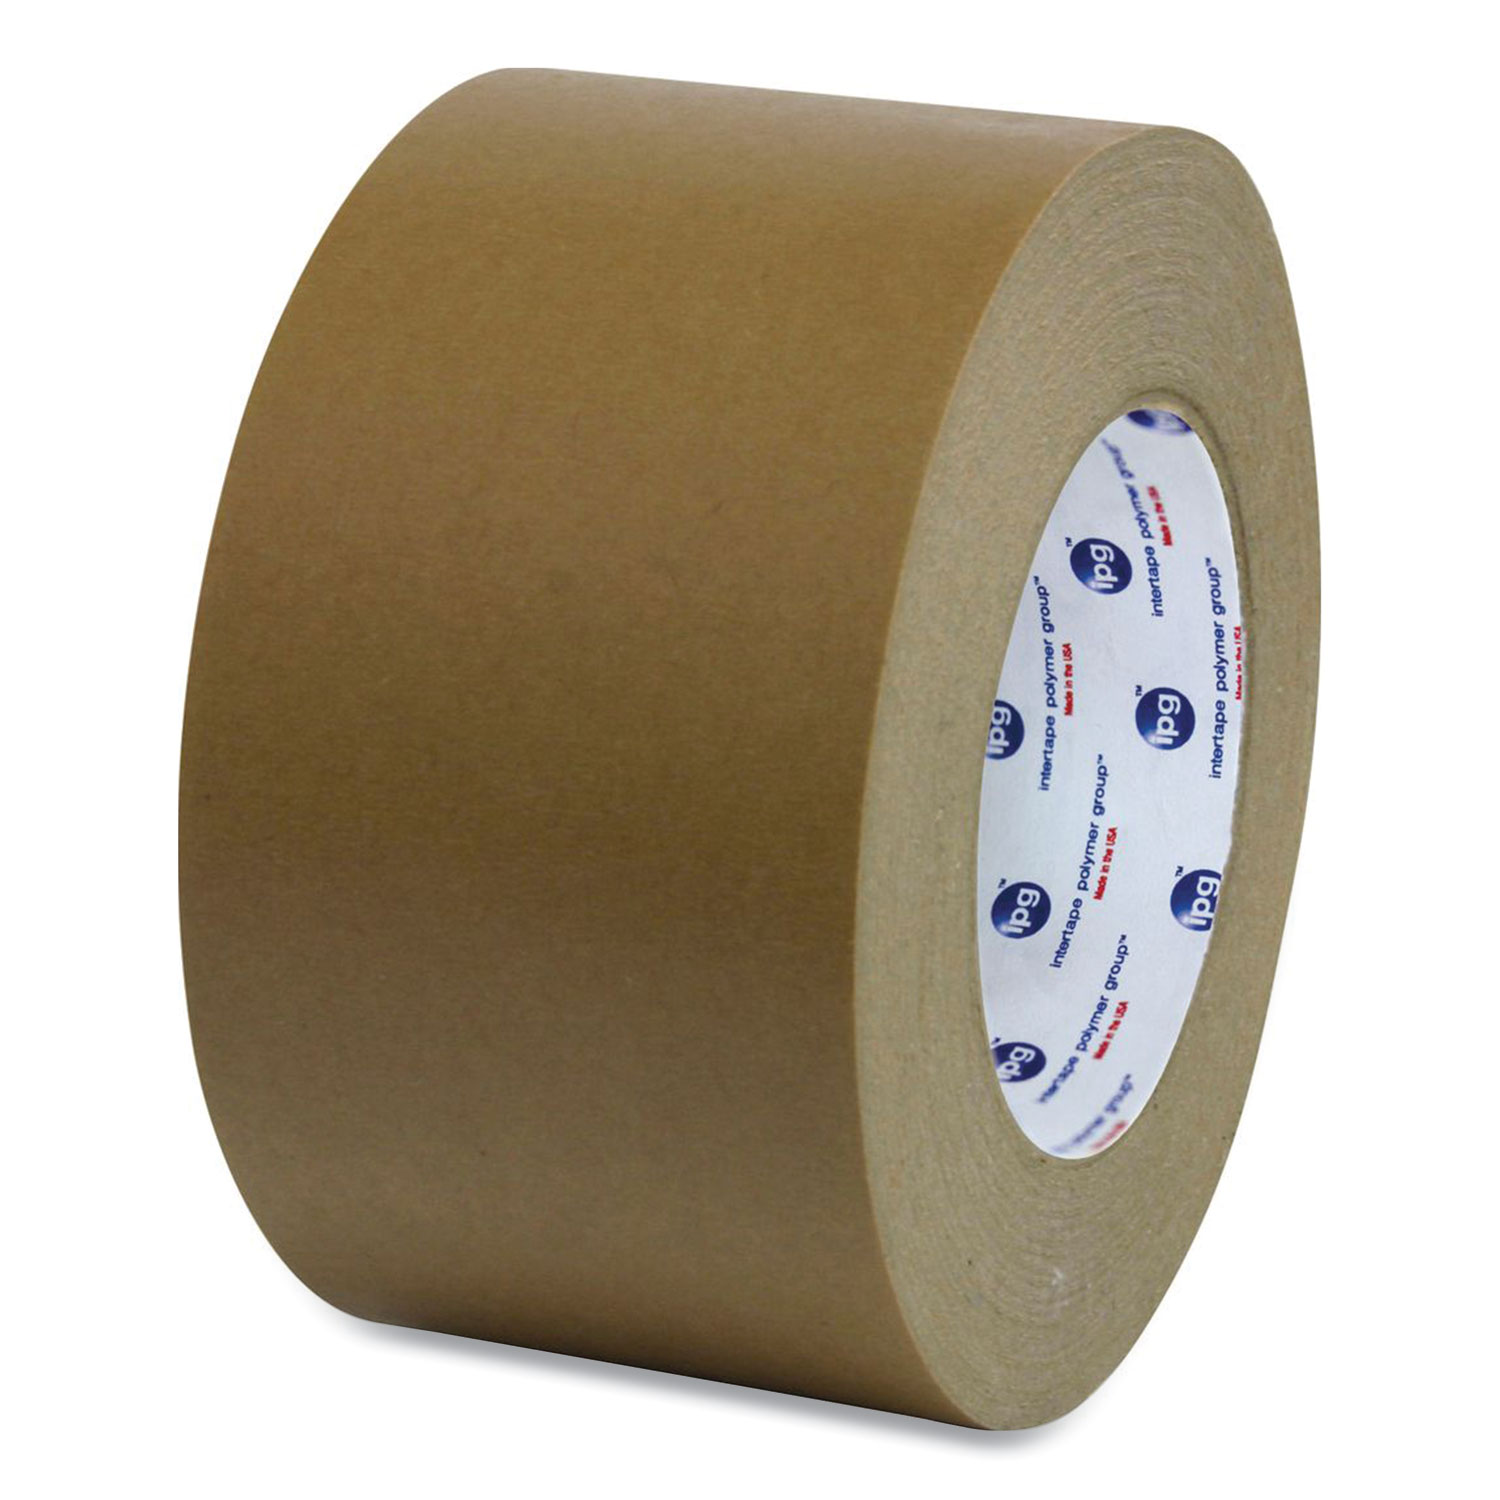  ipg PM3083 Flatback Packing and Splicing Tape, 3 Core, 2 x 60 yds, Clear (IPG480267) 